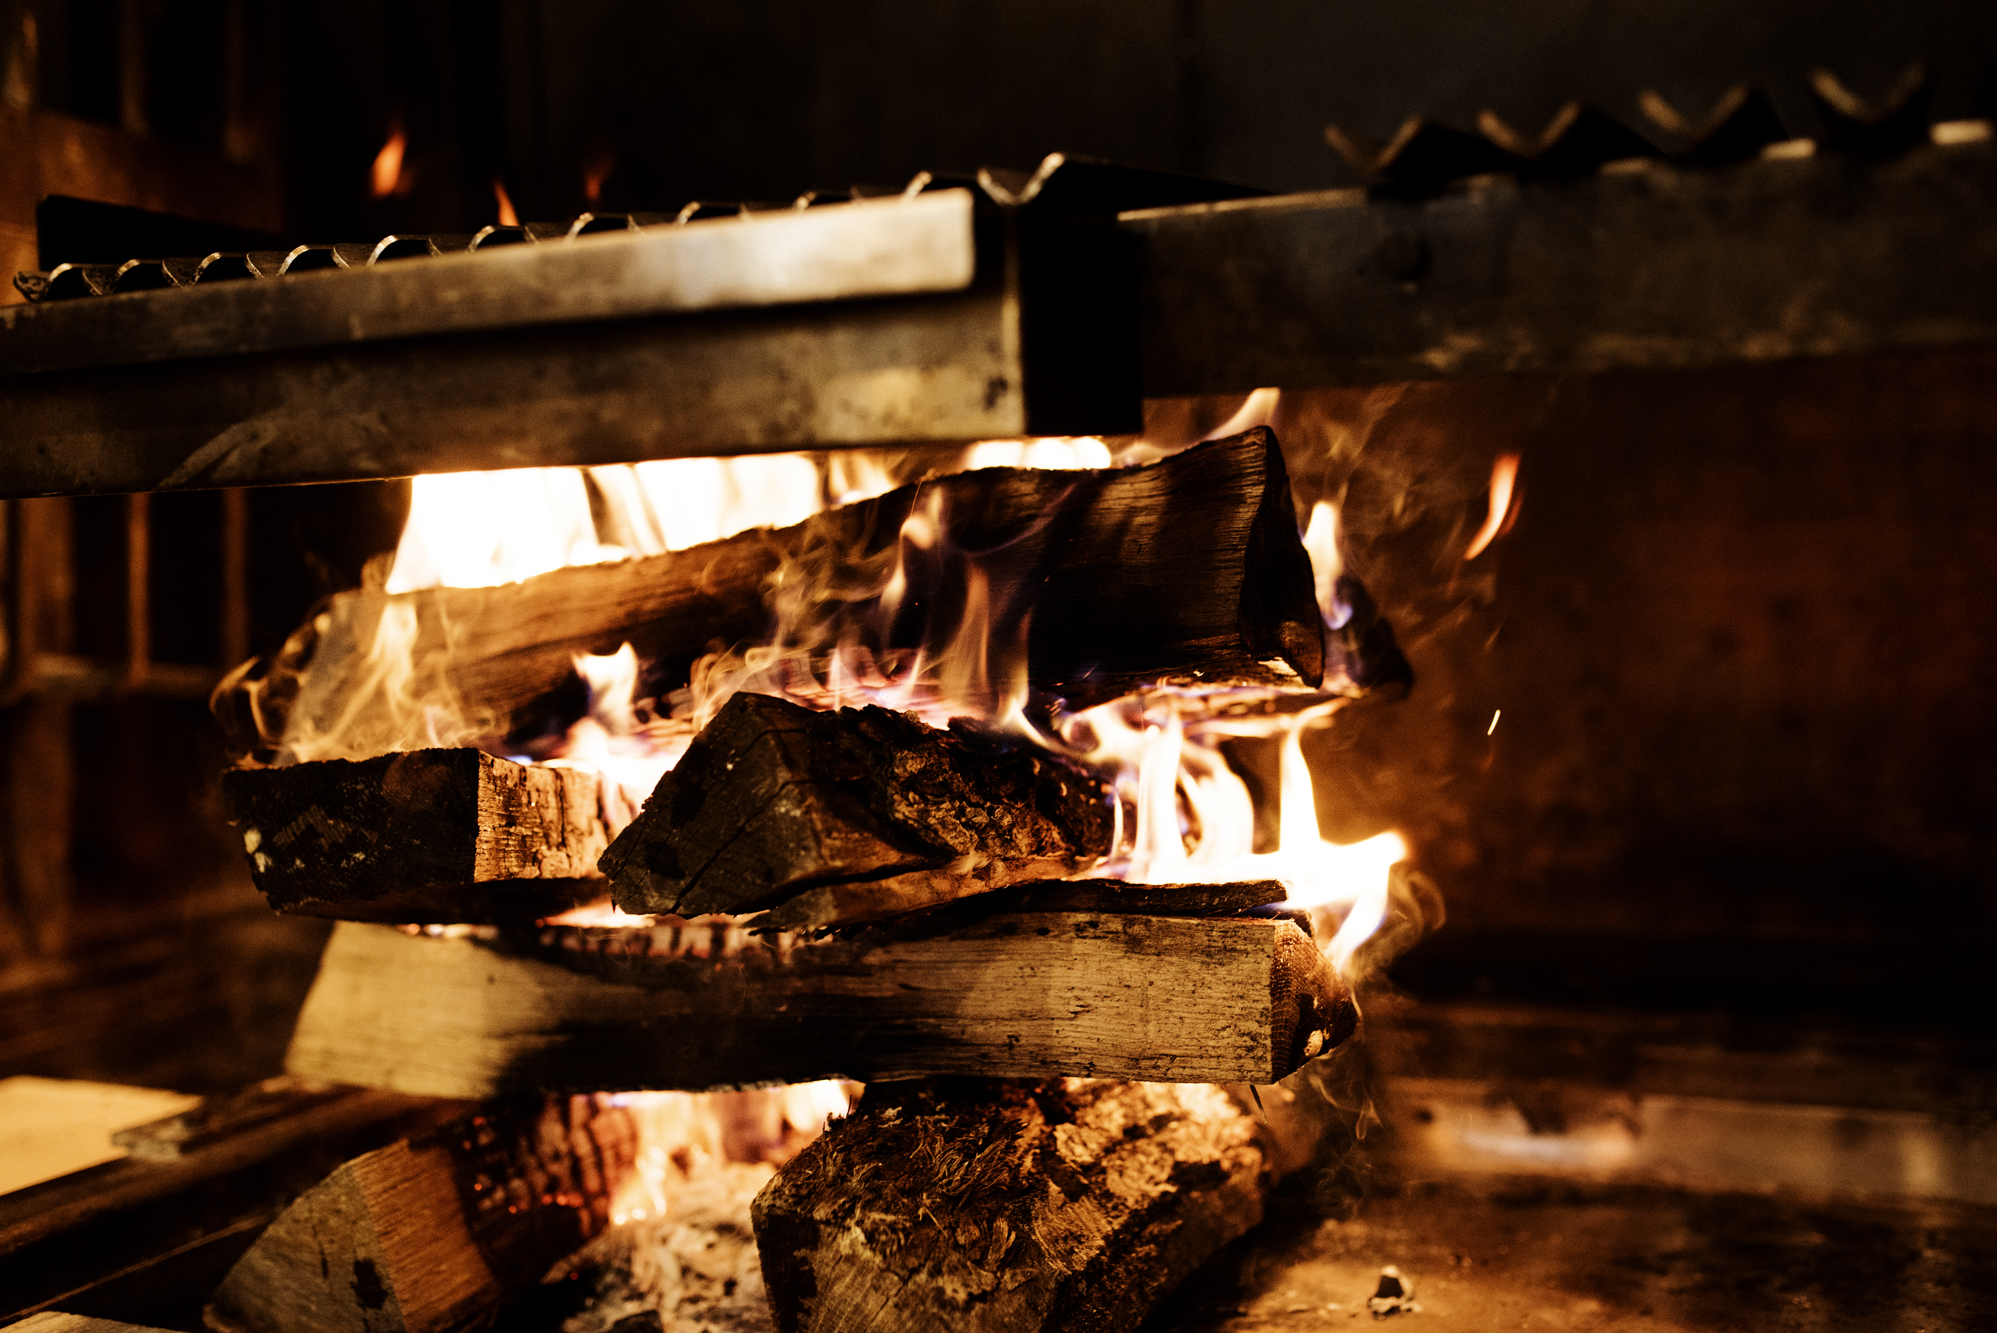 Wood Fire | Martina | The Restaurant Project